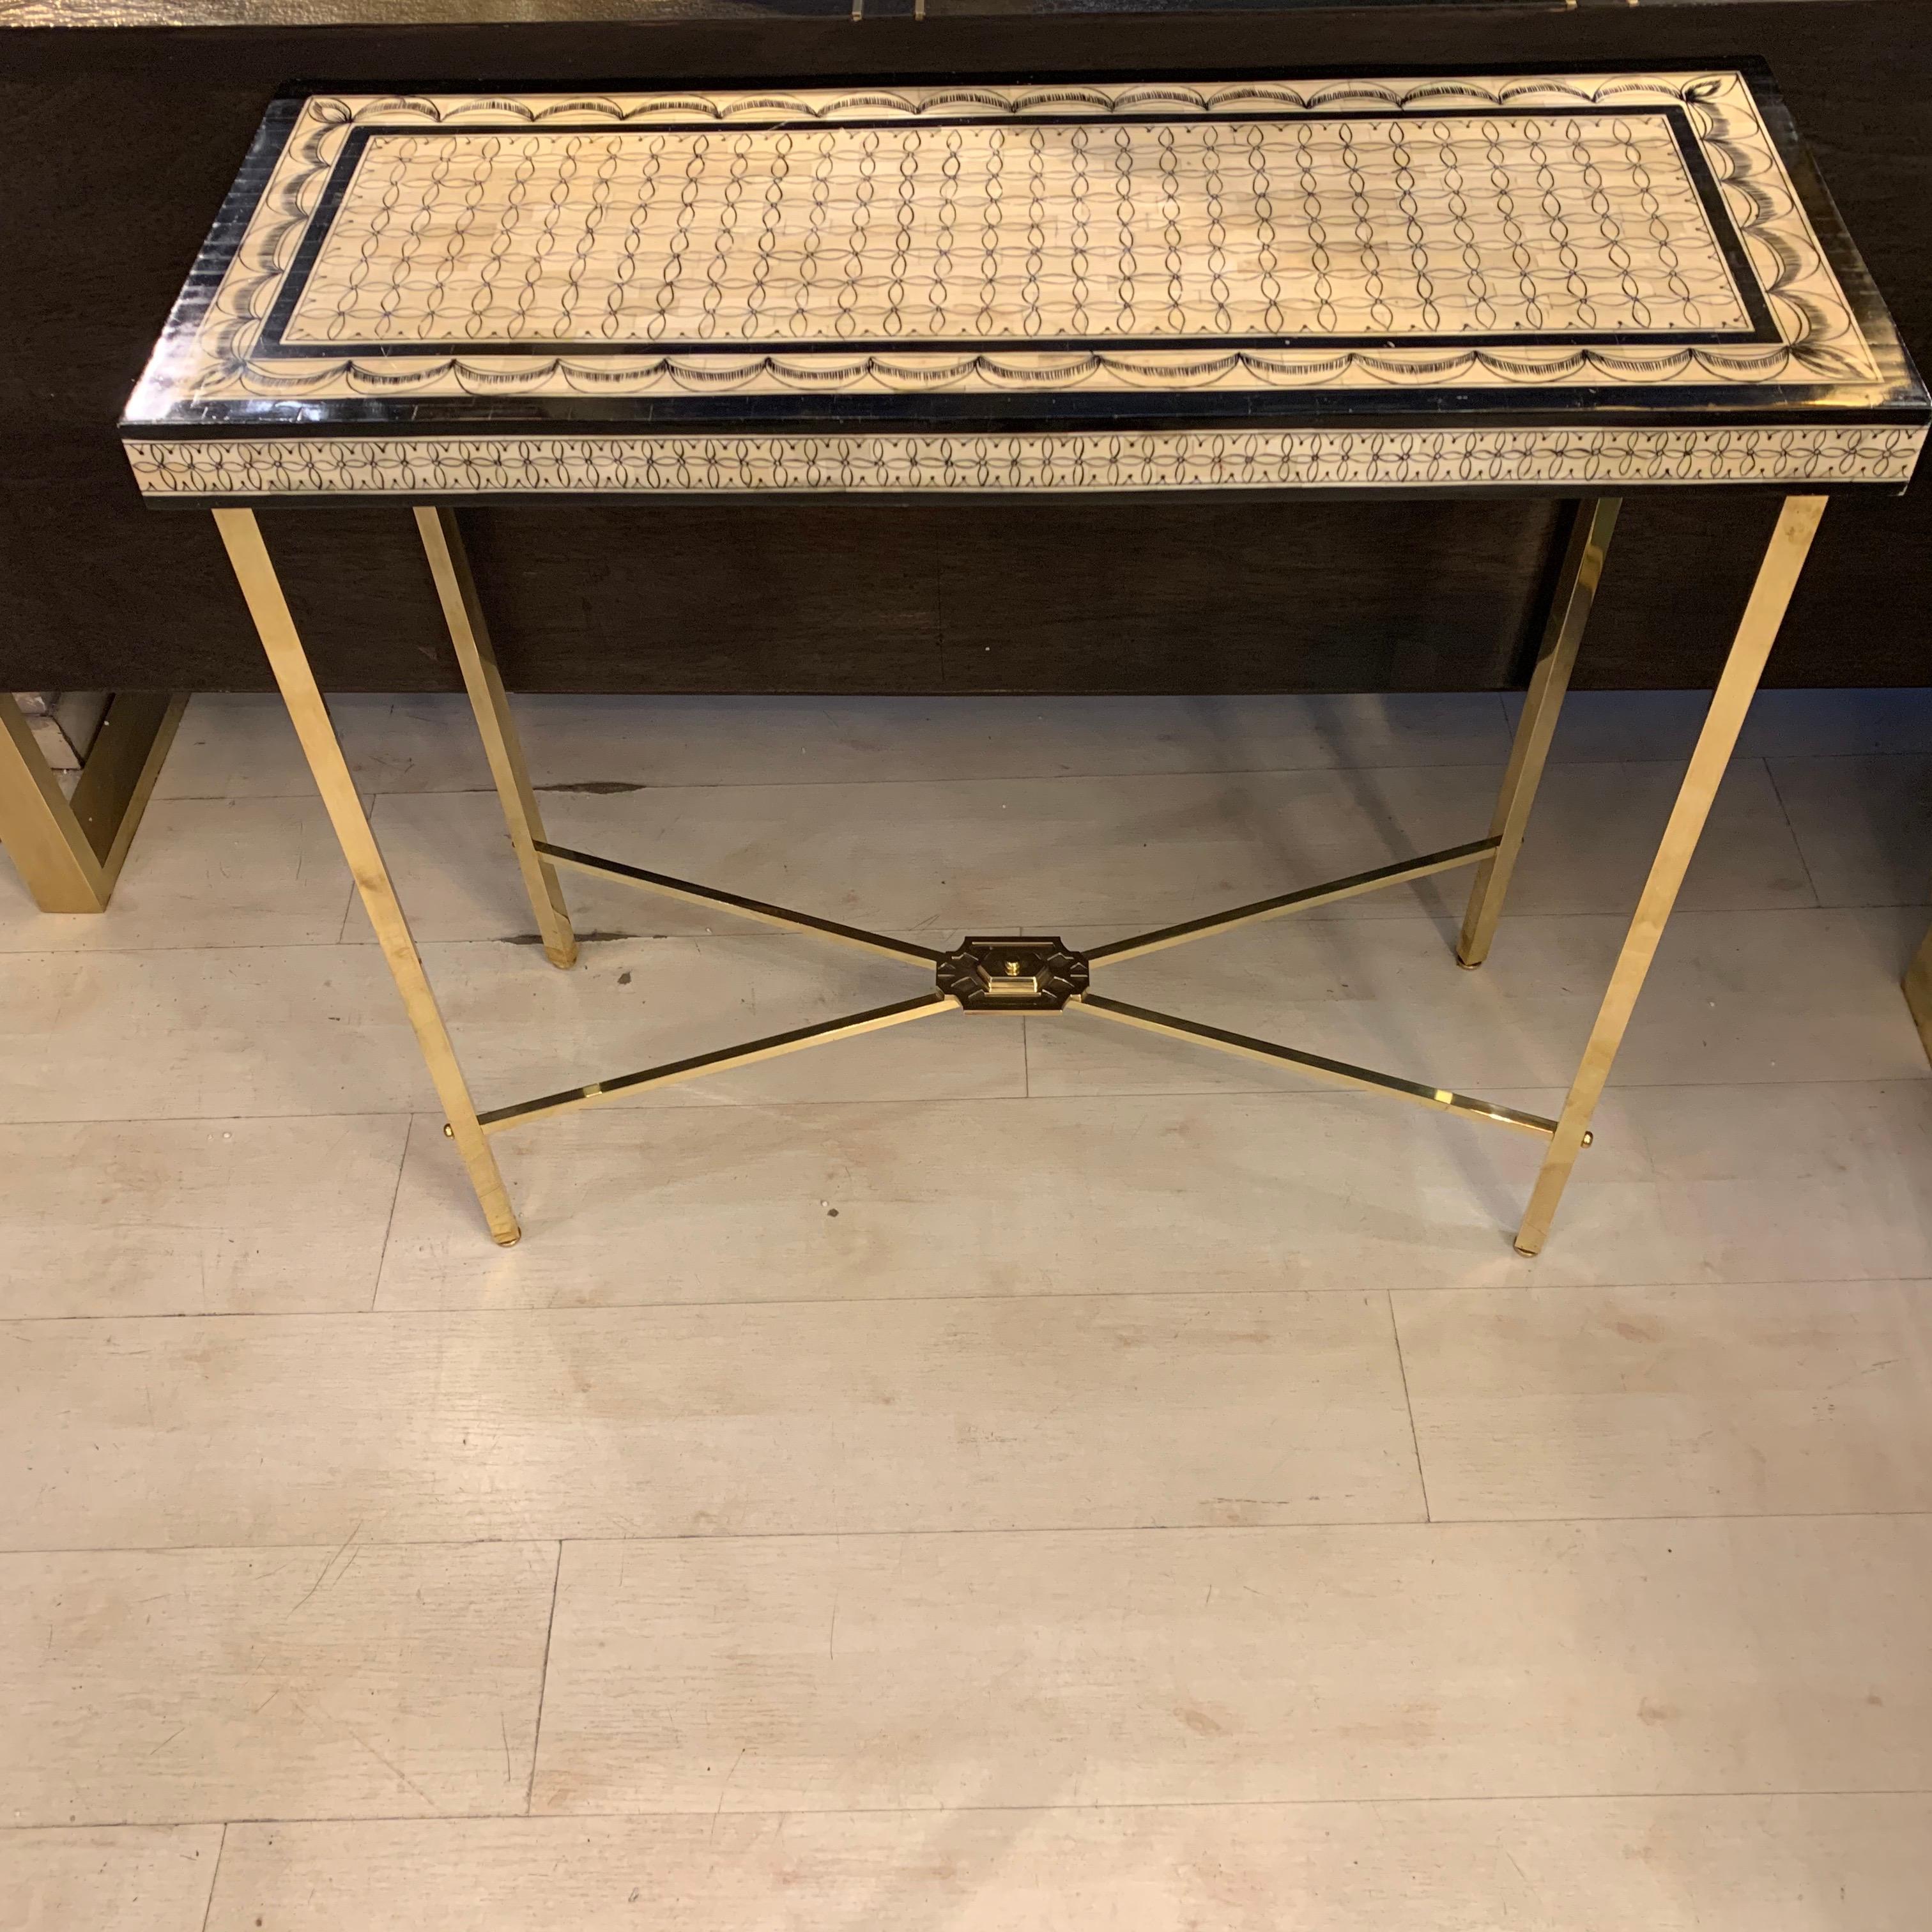 Fornasetti style bone mosaic console with brass legs.
The bone tiles mosaic is decored with black Indian ink.